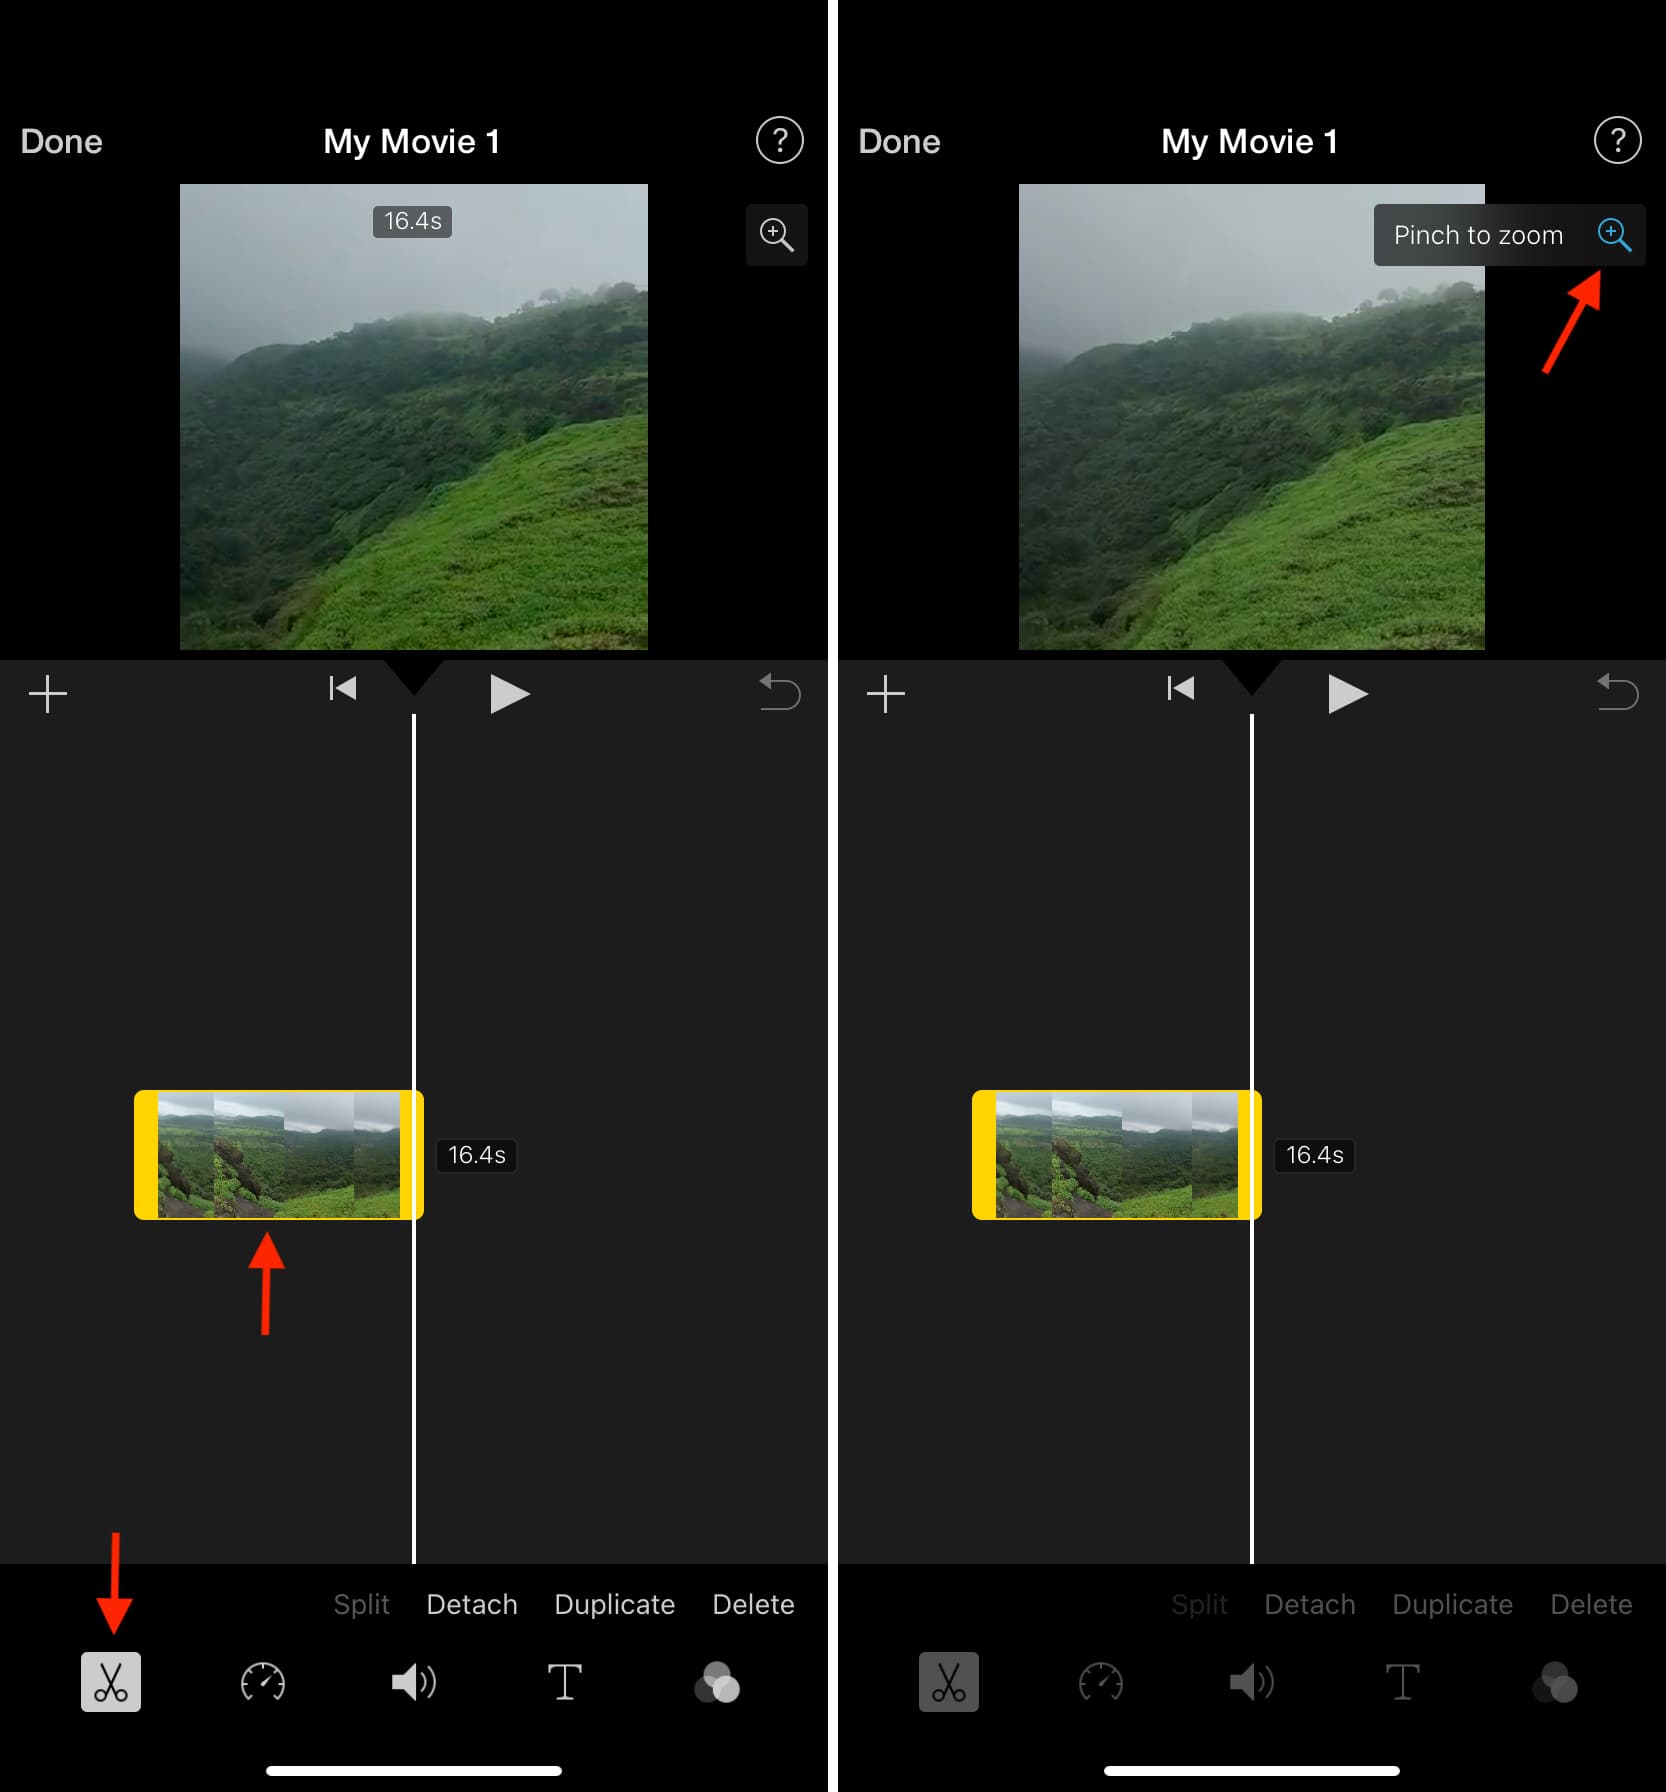 Pinch to zoom in iMovie on iPhone